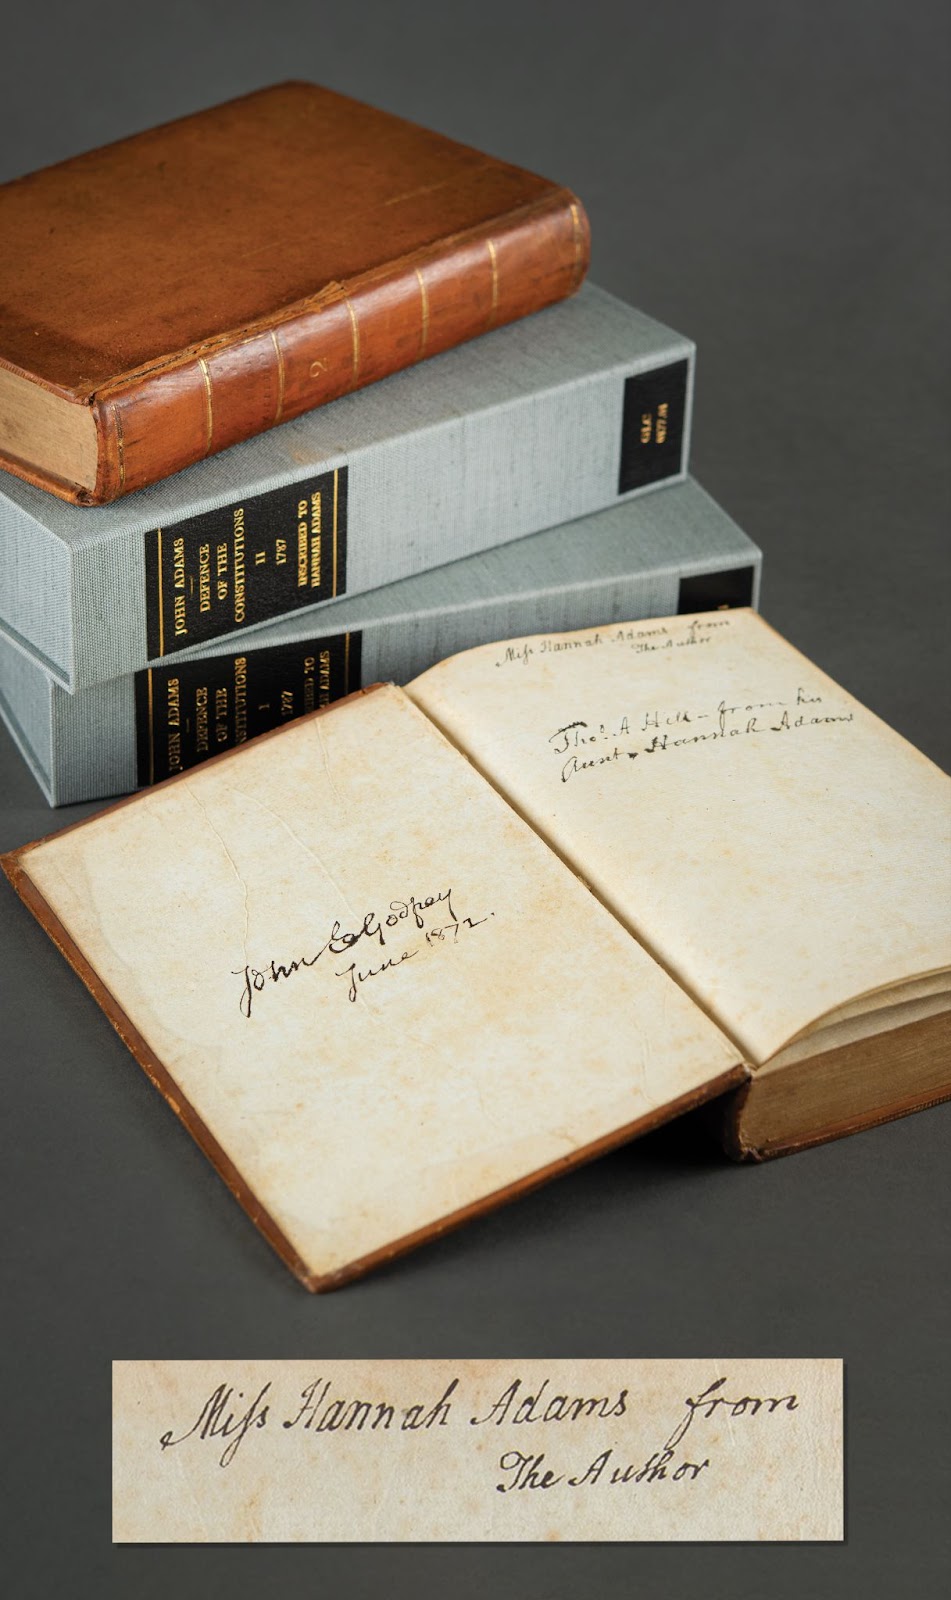 The first two volumes of Adams’s Defence of the Constitutions of the United States of America, showing Adams’s inscription to his cousin, “Miss Hannah Adams, from The Author.”